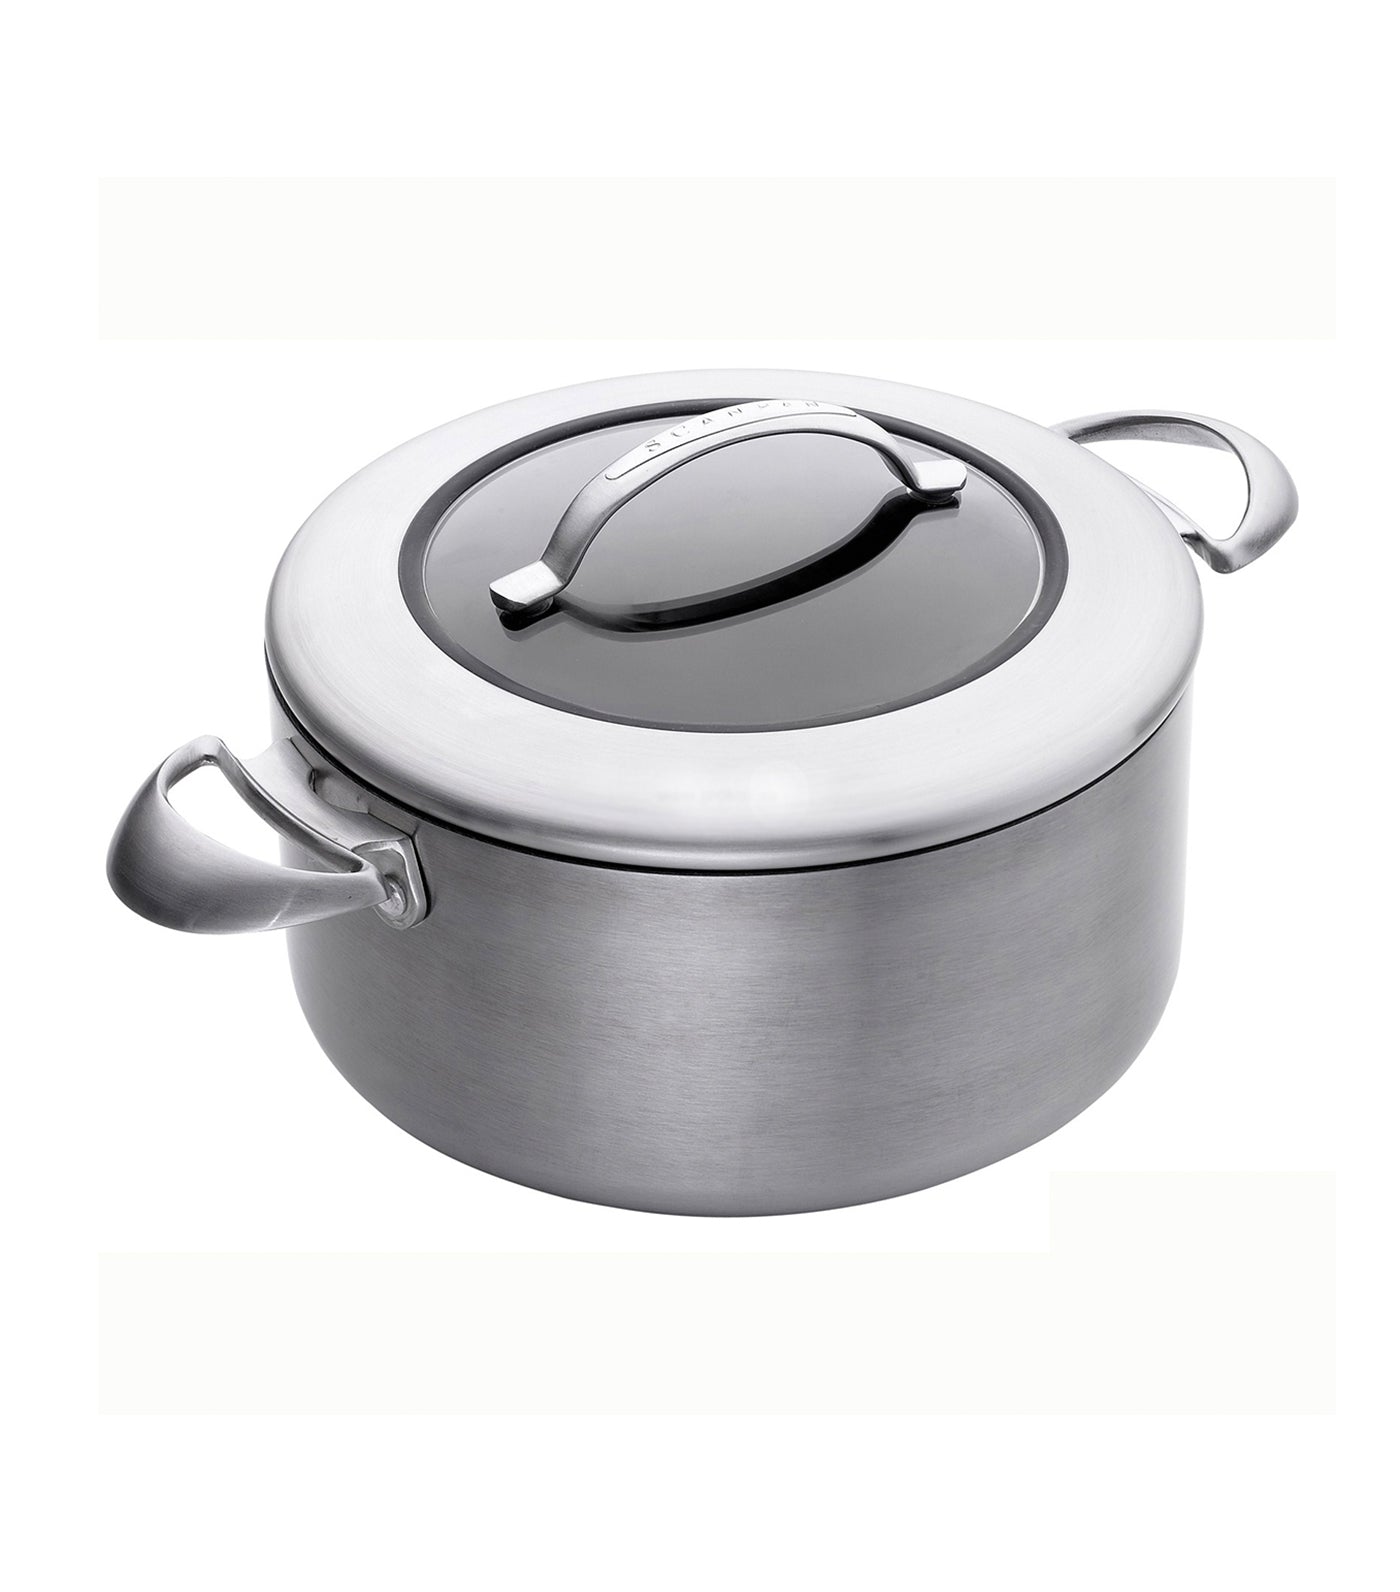 CTX Dutch Oven with Lid - 3.5L